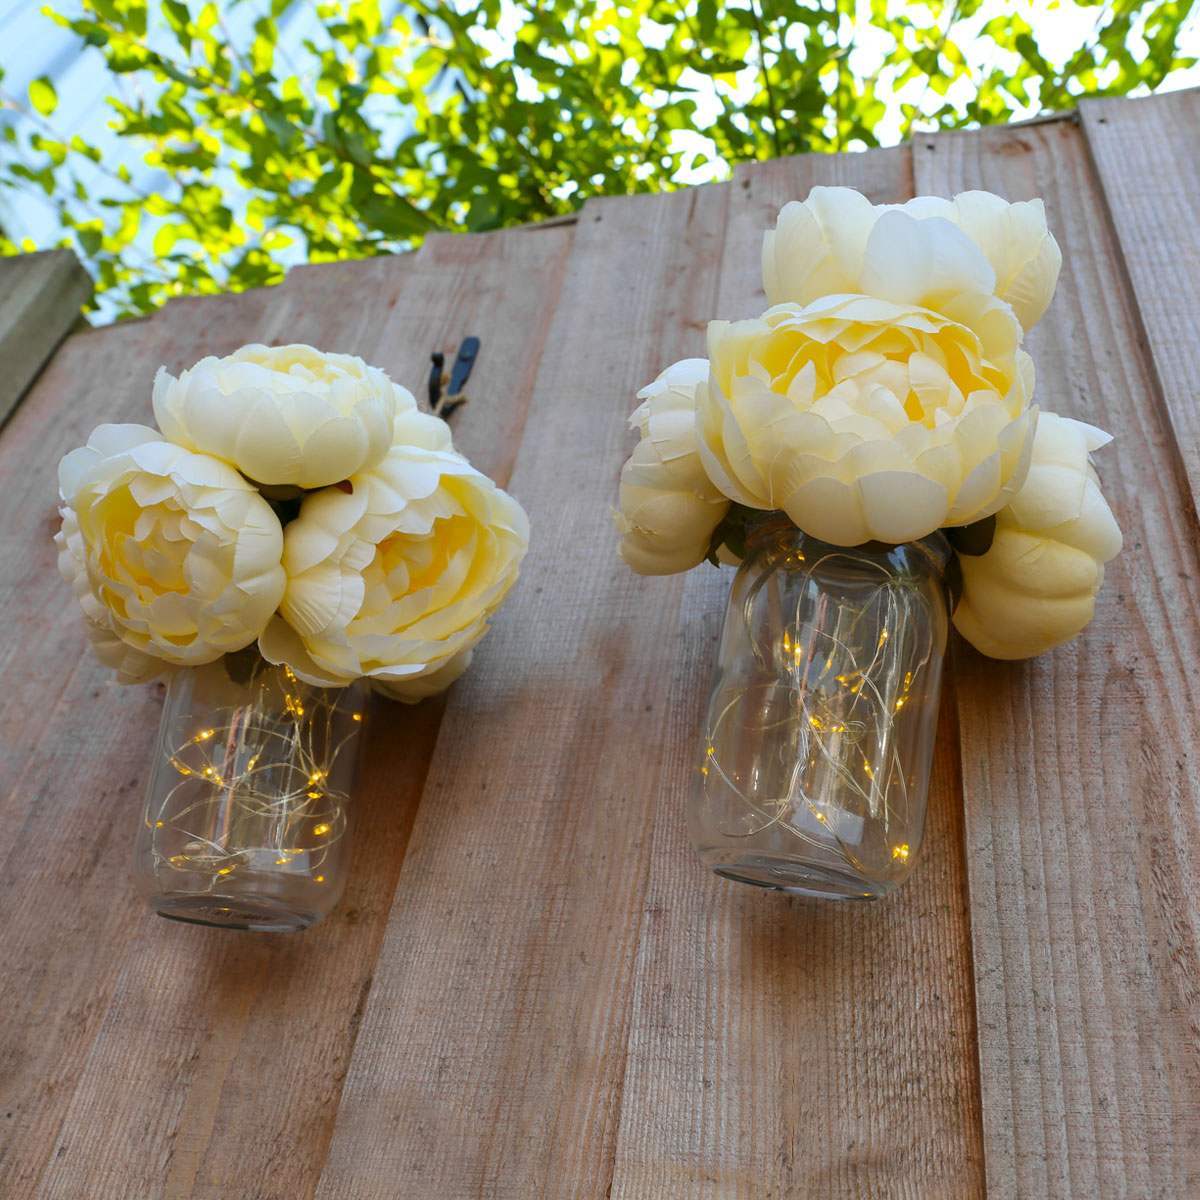 How To Make Your Own Hanging Mason Jar Sconces